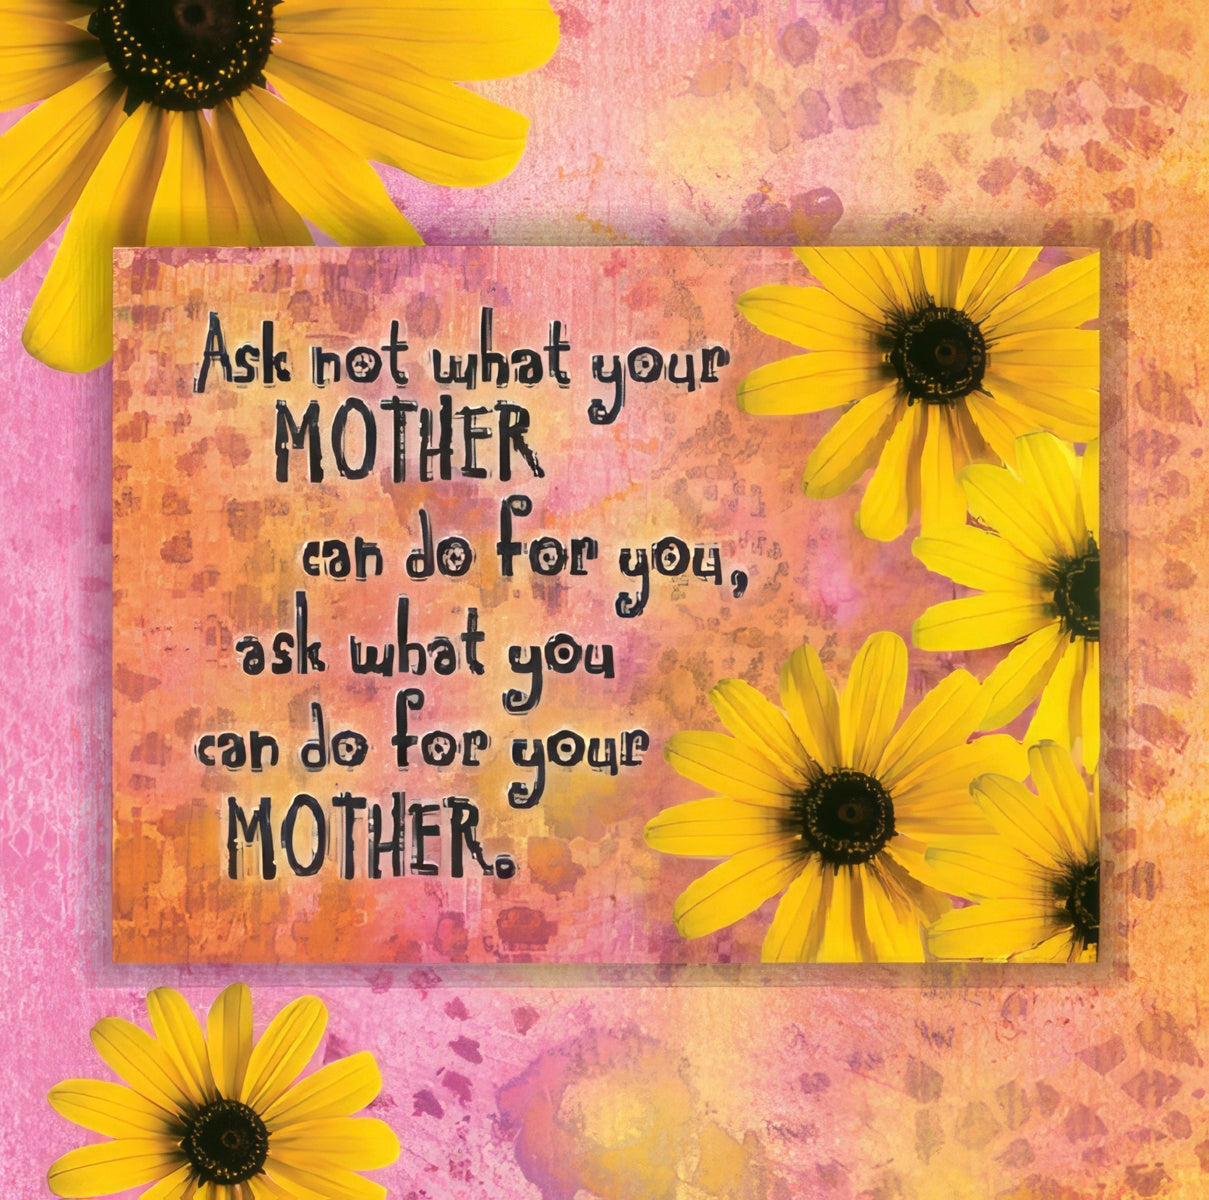 What Can You Do For Your Mother?